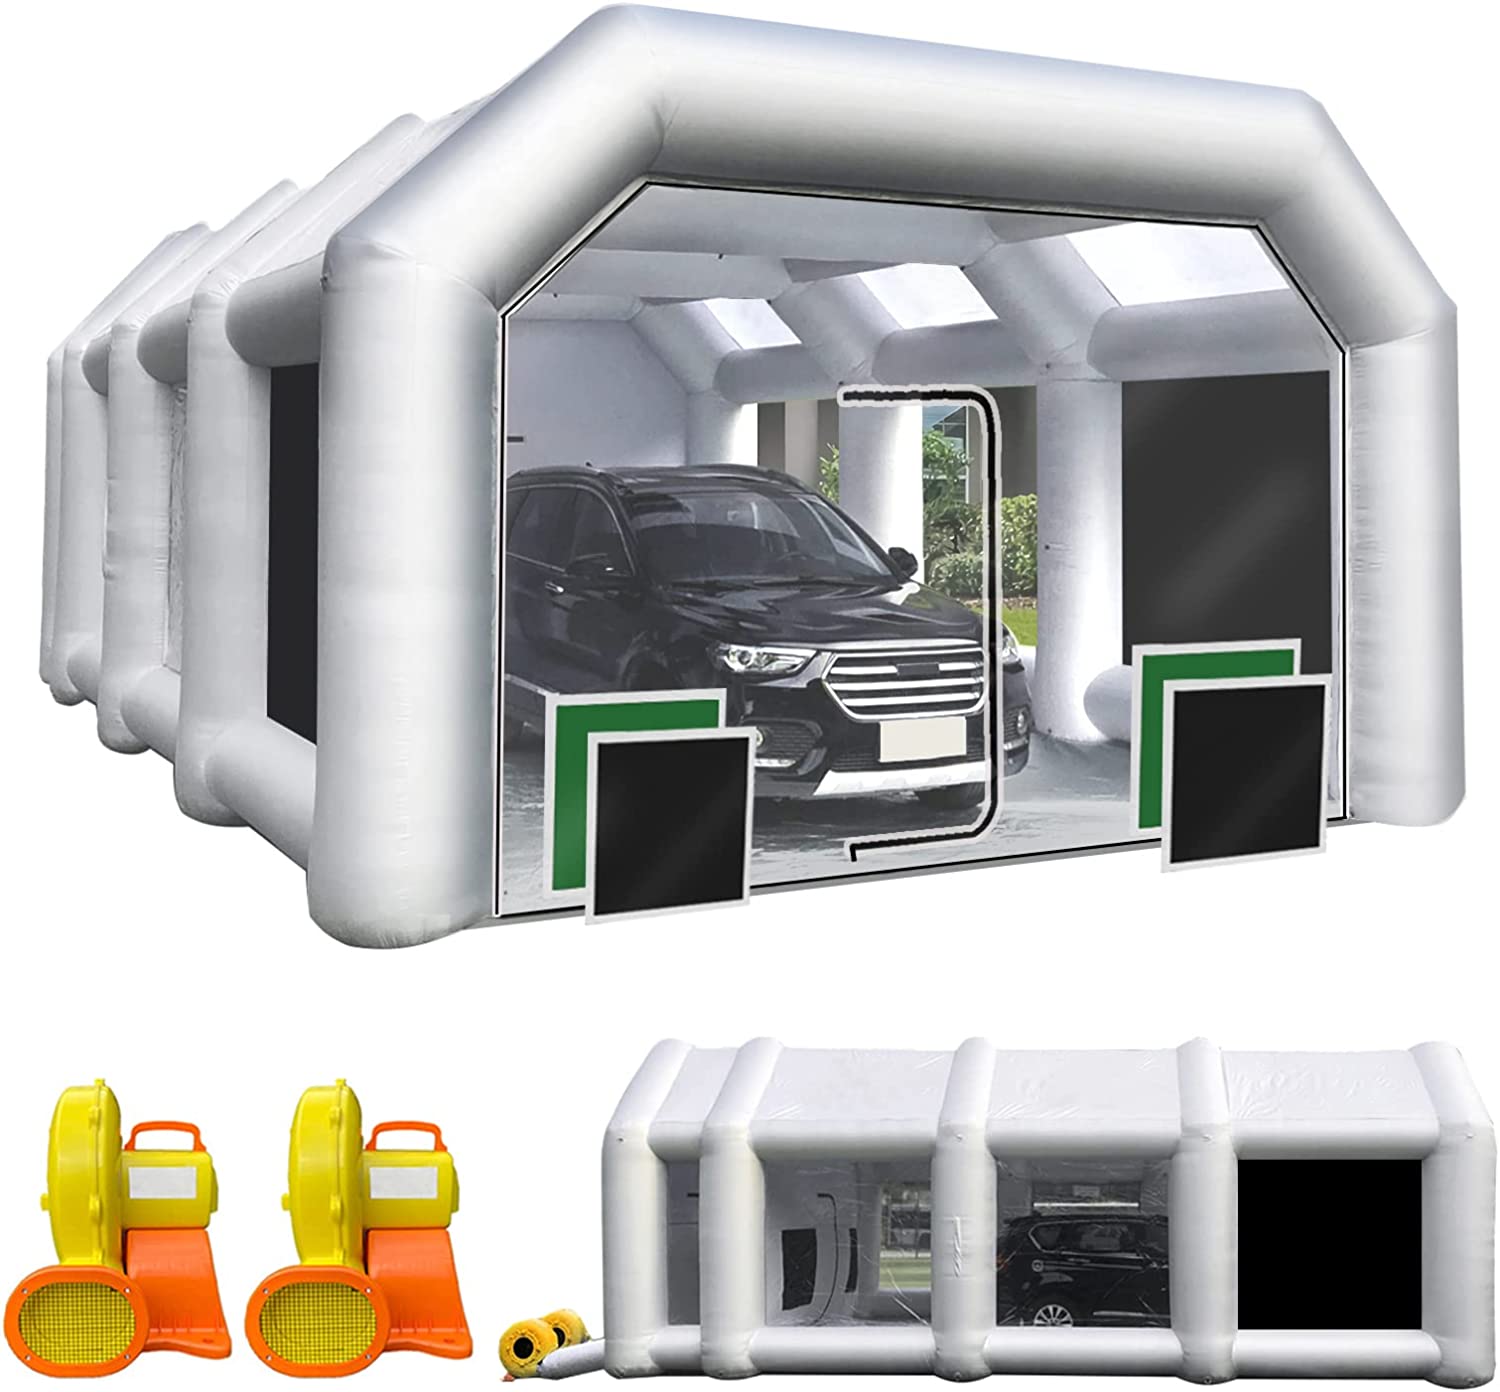 Customized Portable Inflatable Spray Paint Booth With Carbon